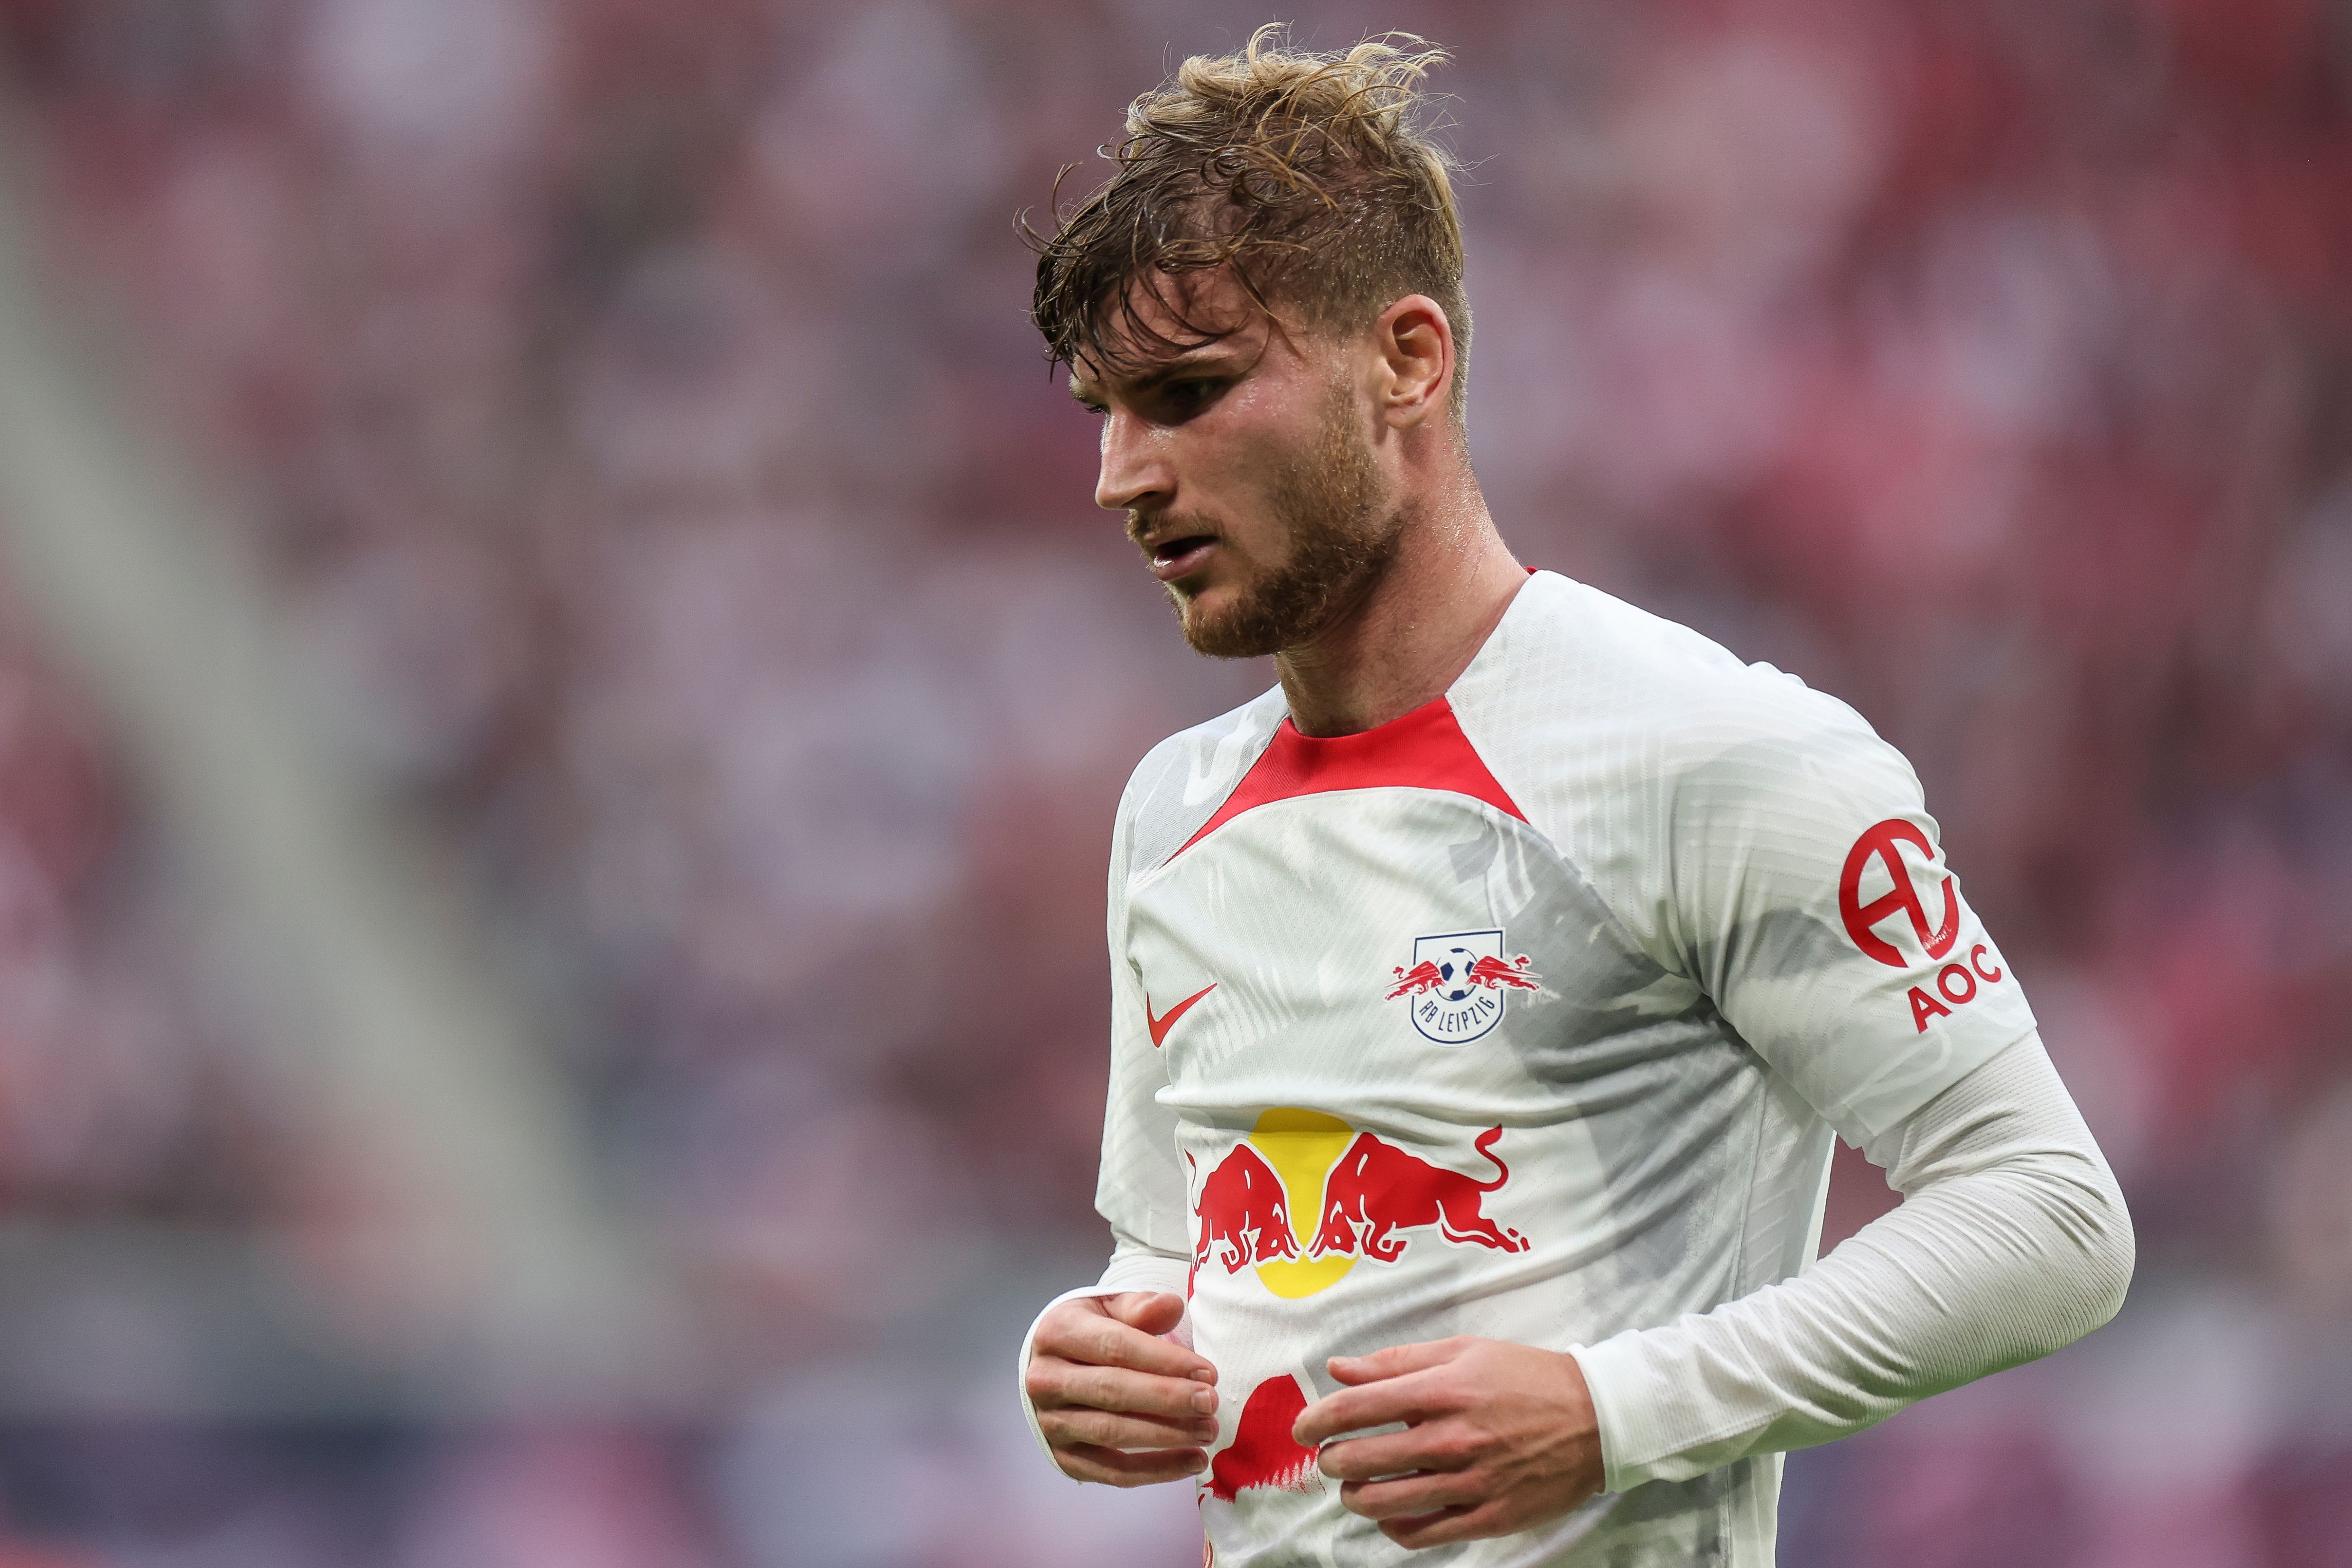 Germany's Timo Werner will miss the World Cup